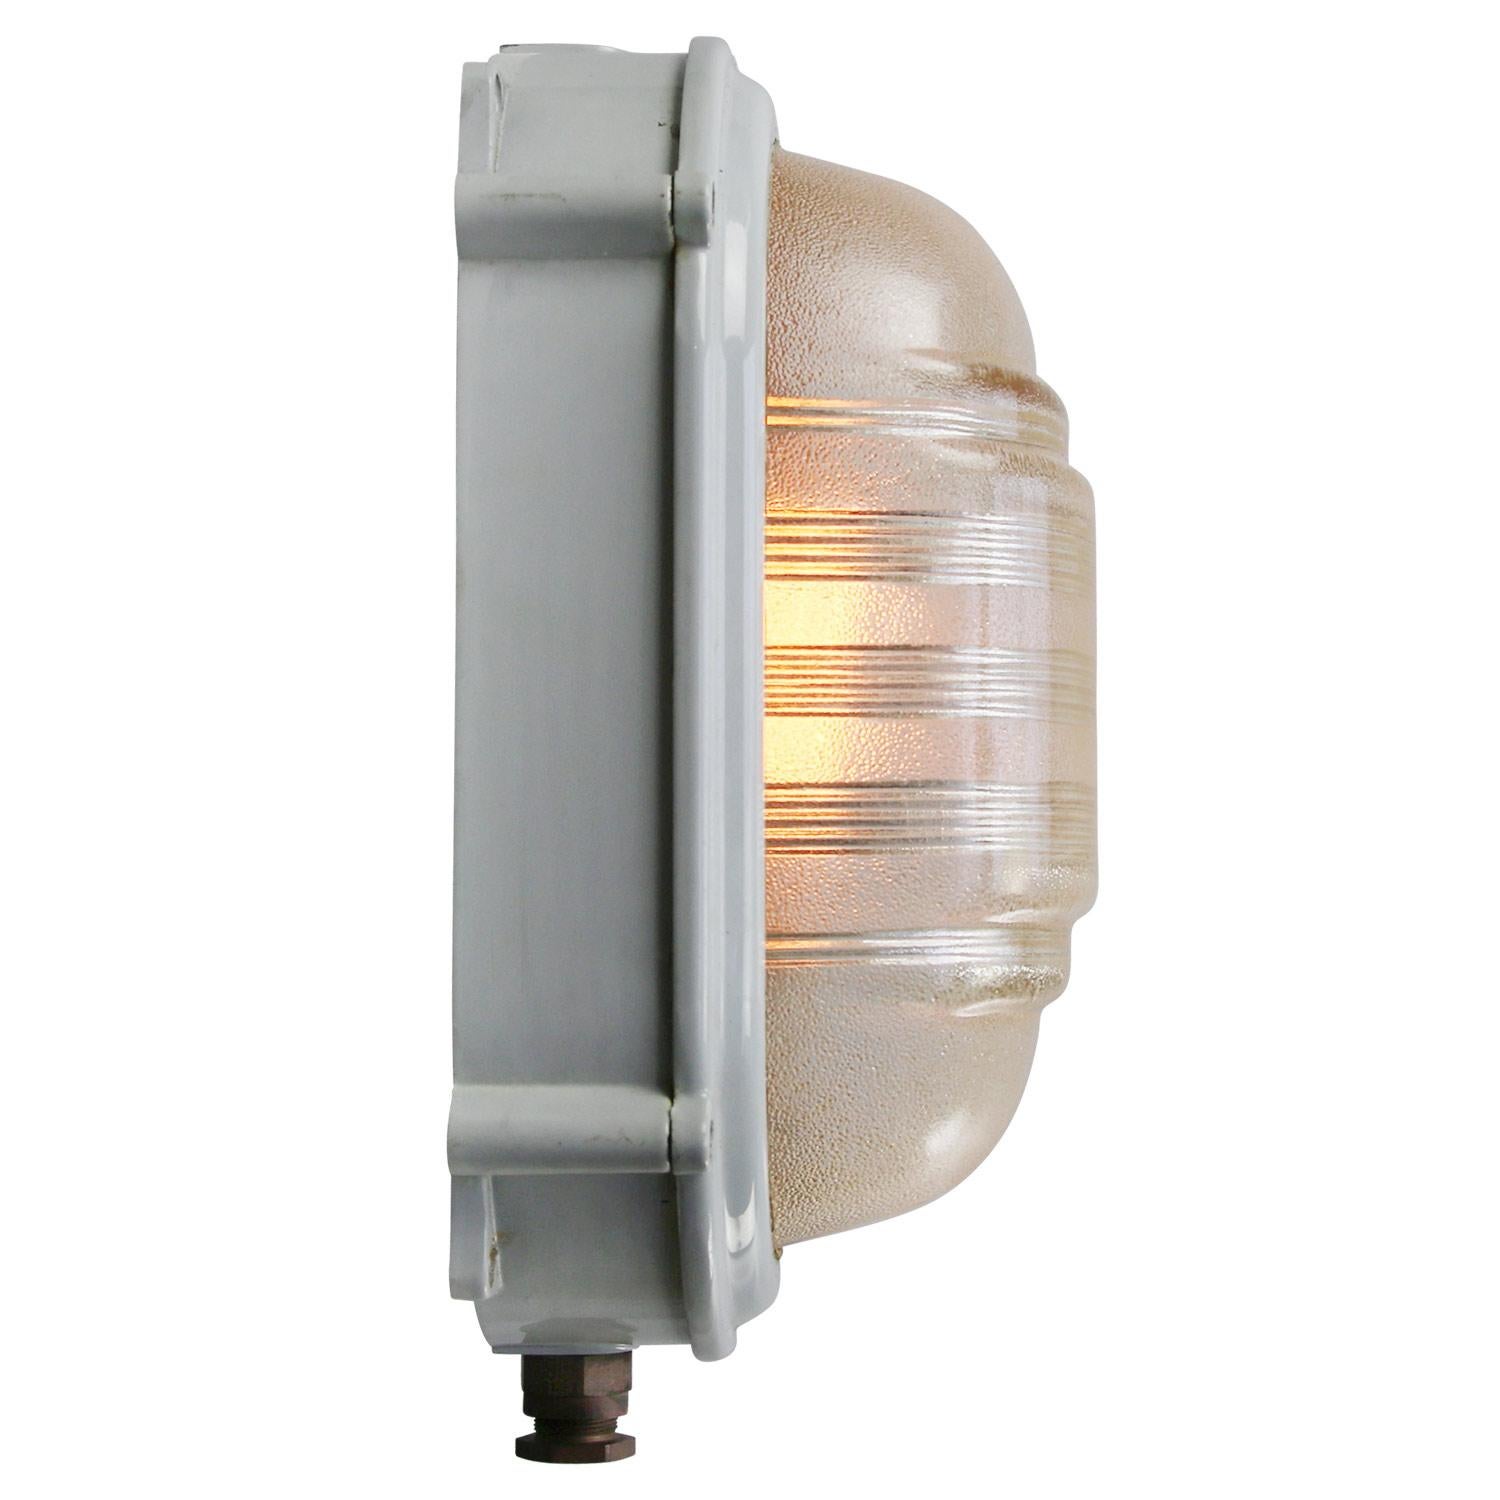 Industrial wall or ceiling lamp by Coughtrie Glasgow
cast aluminum, striped prismatic frosted glass

E27 / E26

Weight 0.50 kg / 1.1 lb

All lamps have been made suitable by international standards for incandescent light bulbs,